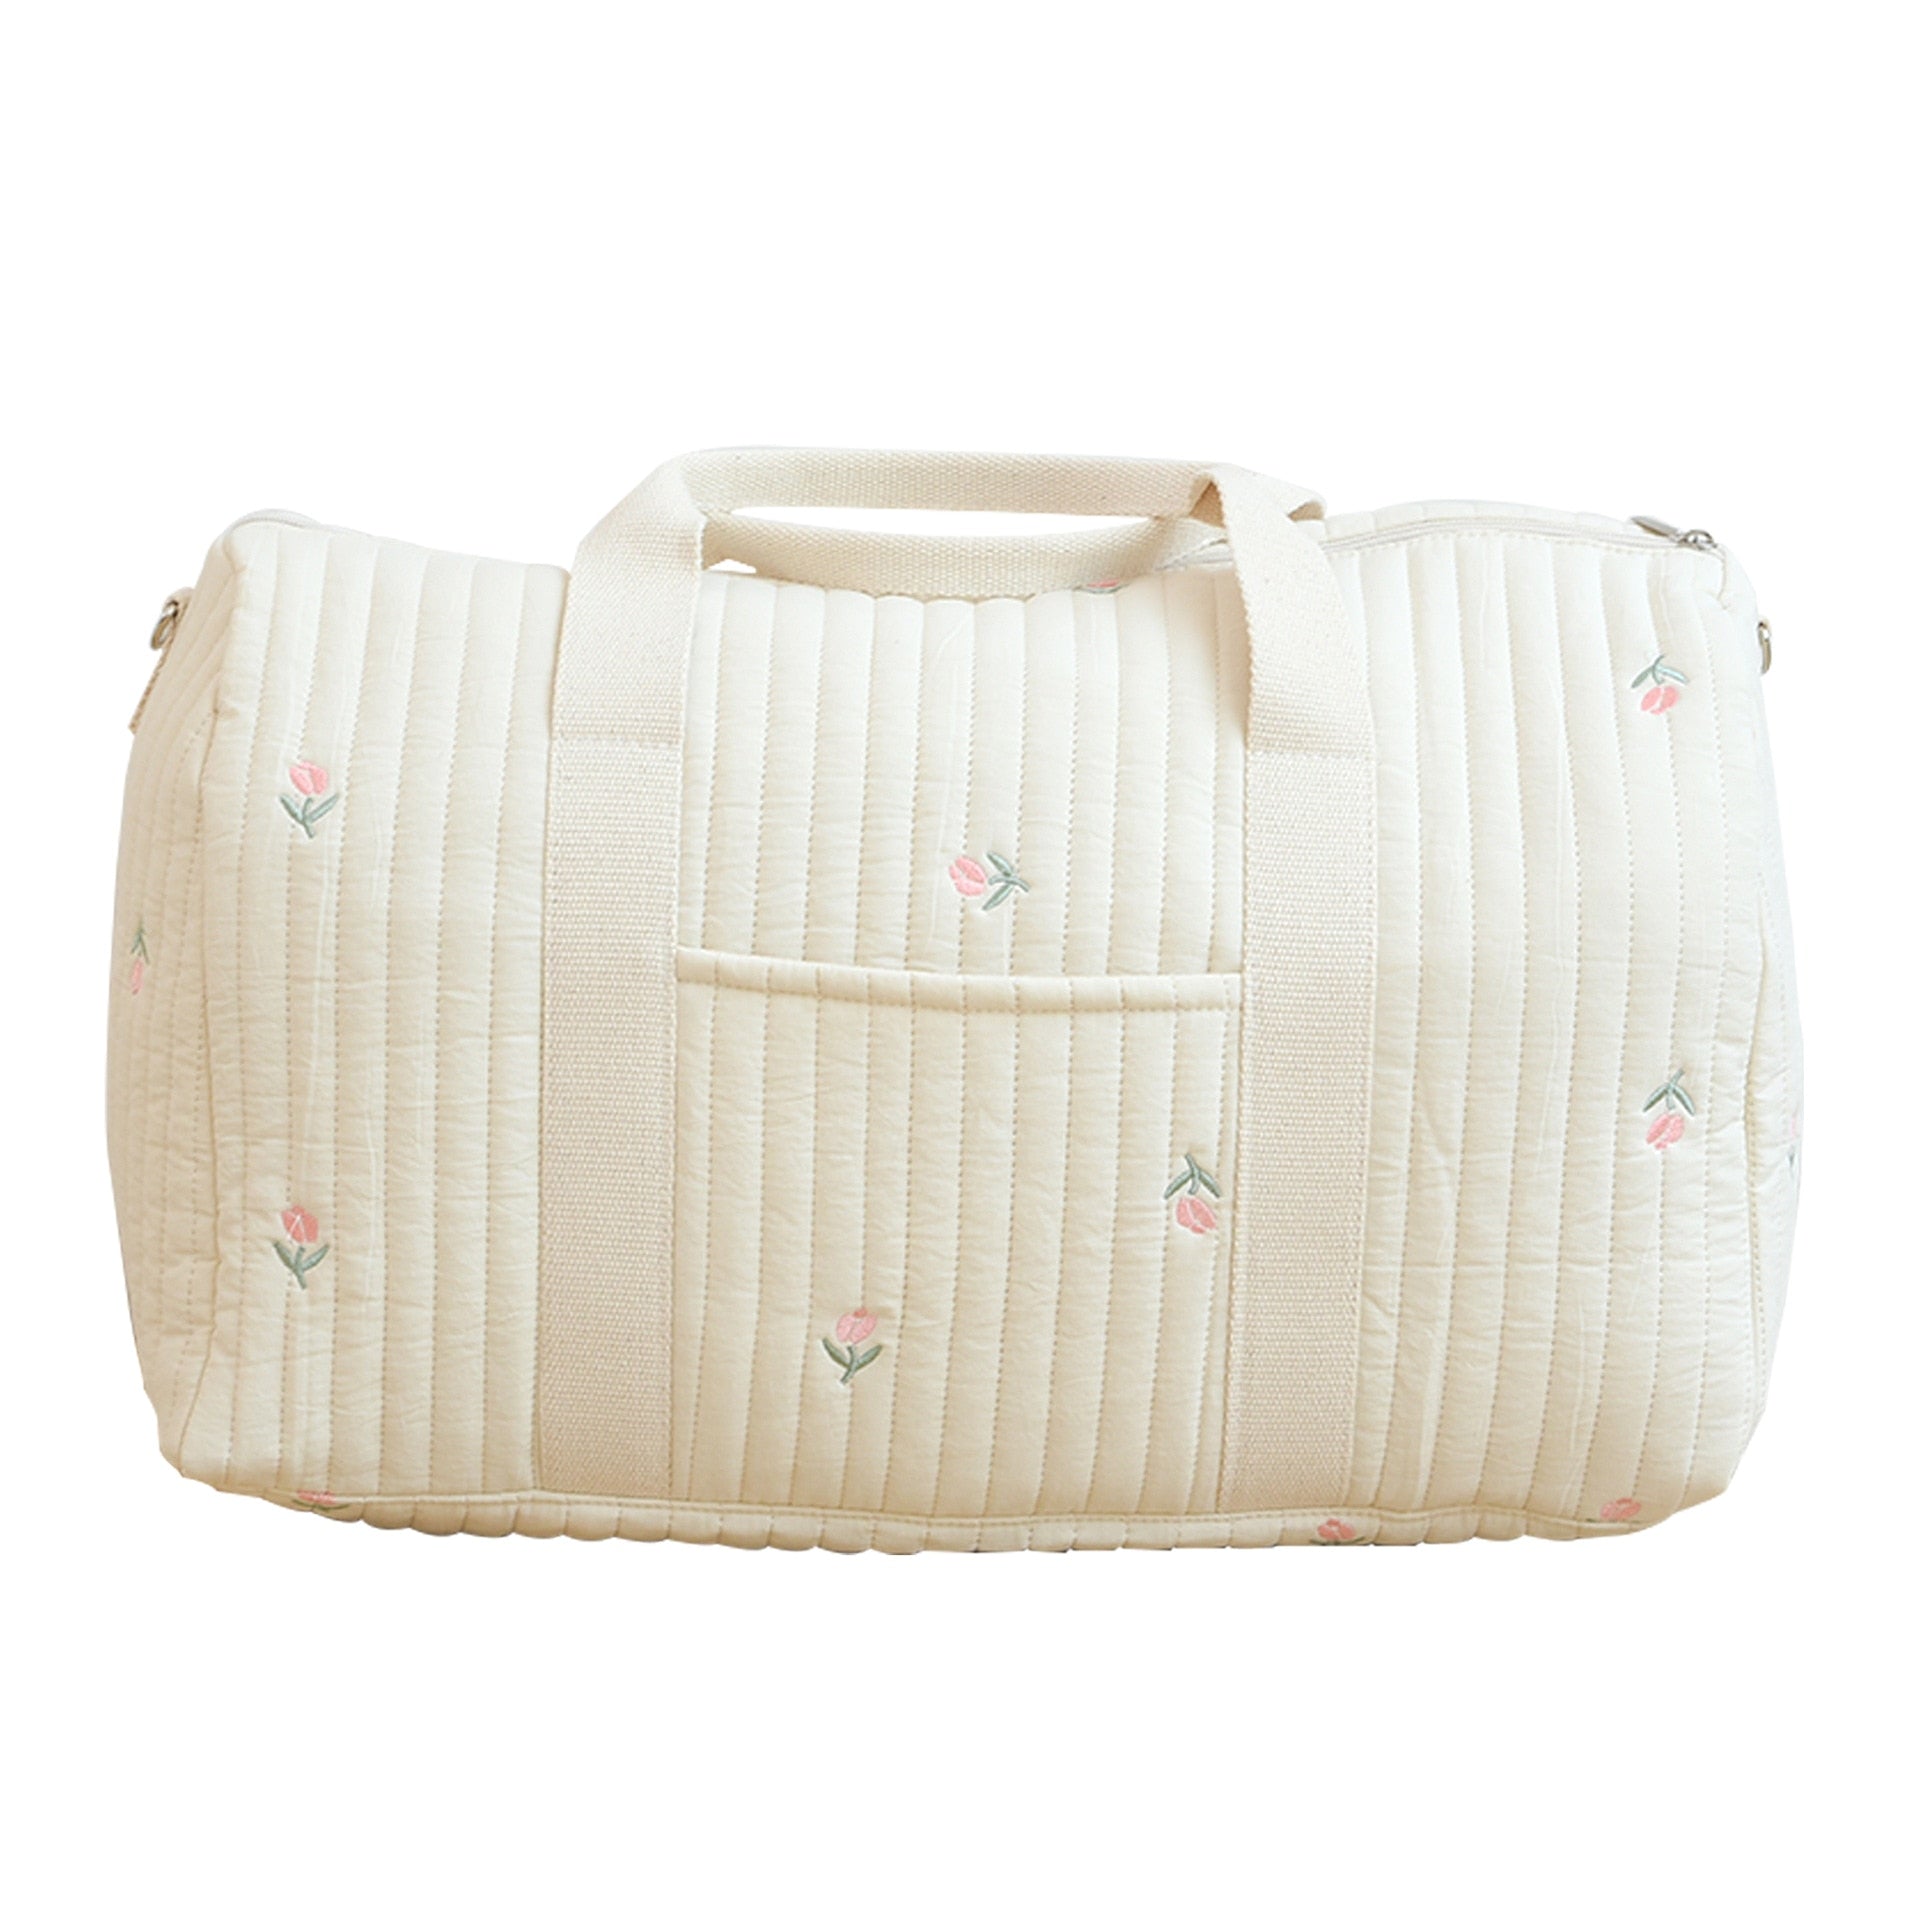 Large Maternity Bag / Diaper Maternal Mommy Bags for 4-6 yrs